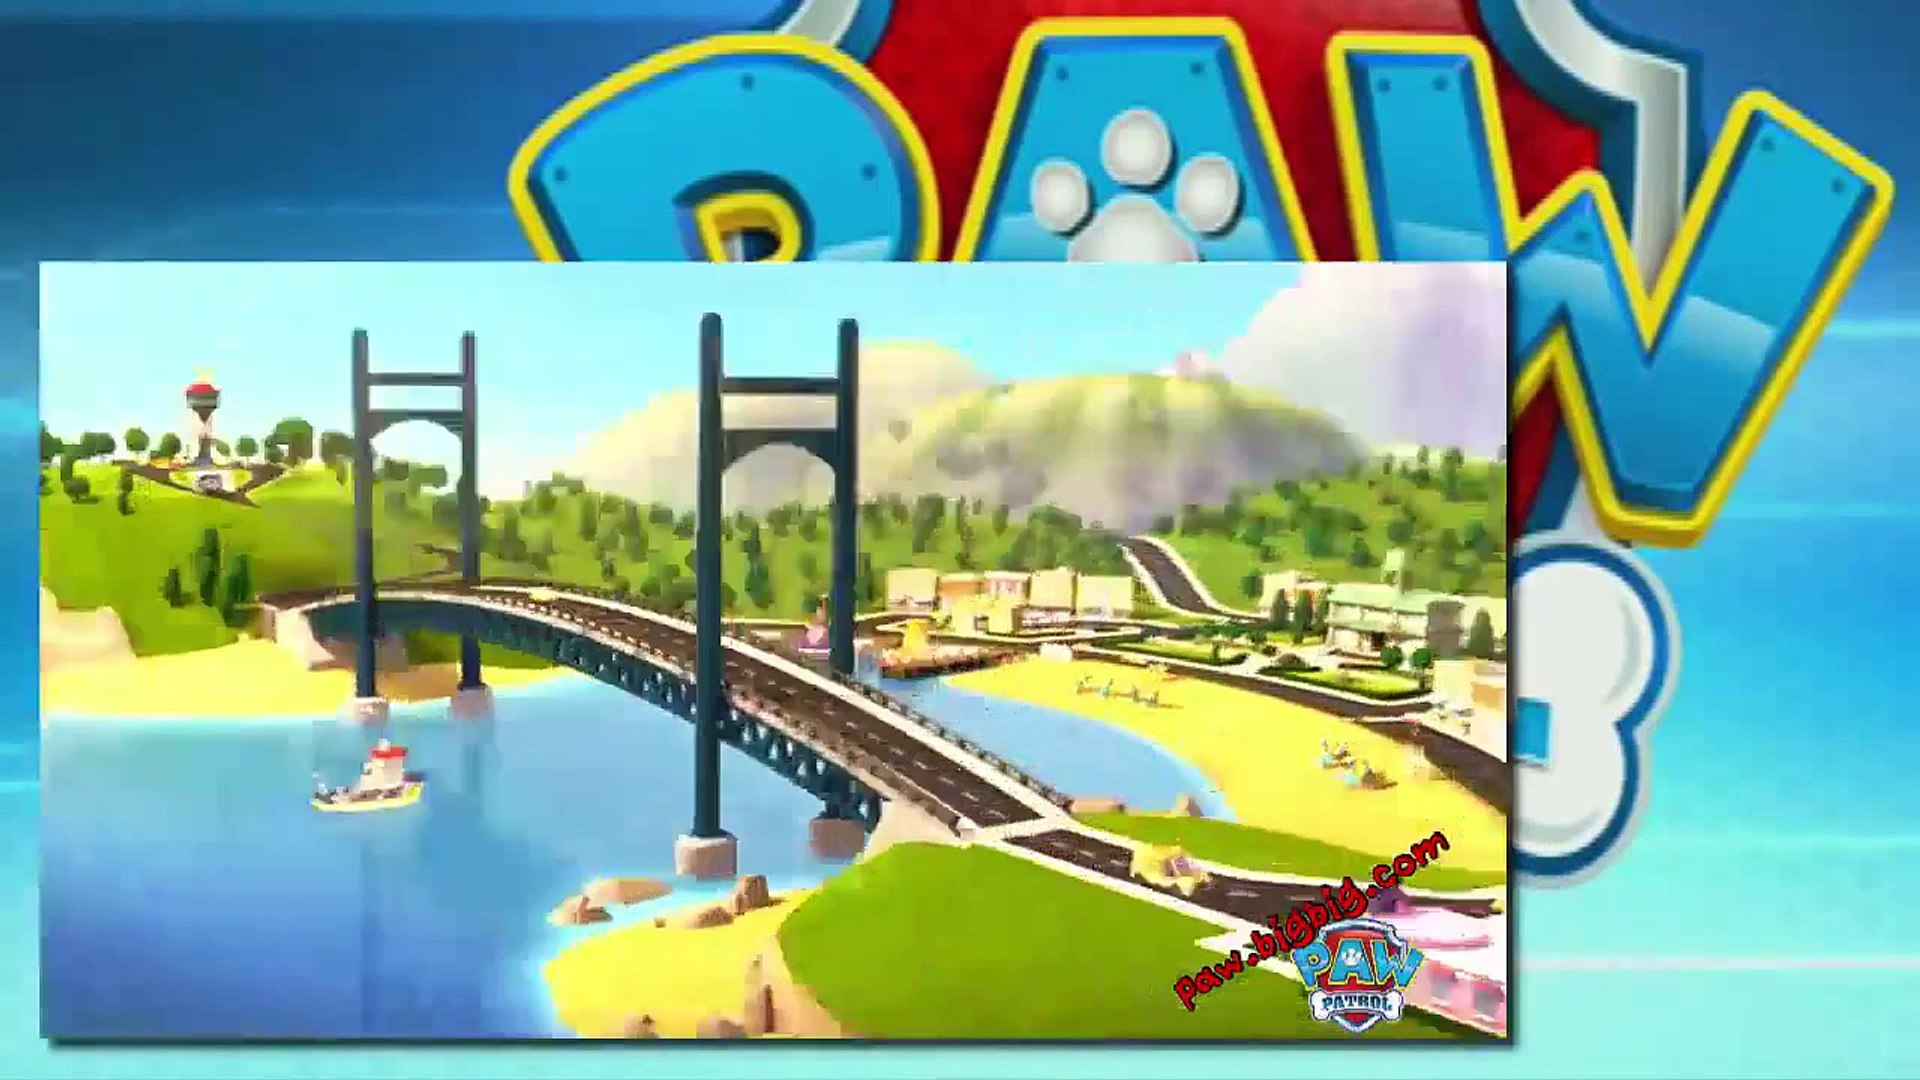 PAW Patrol NEDERLANDS Opening Intro Theme Song and Lyrics video Dailymotion